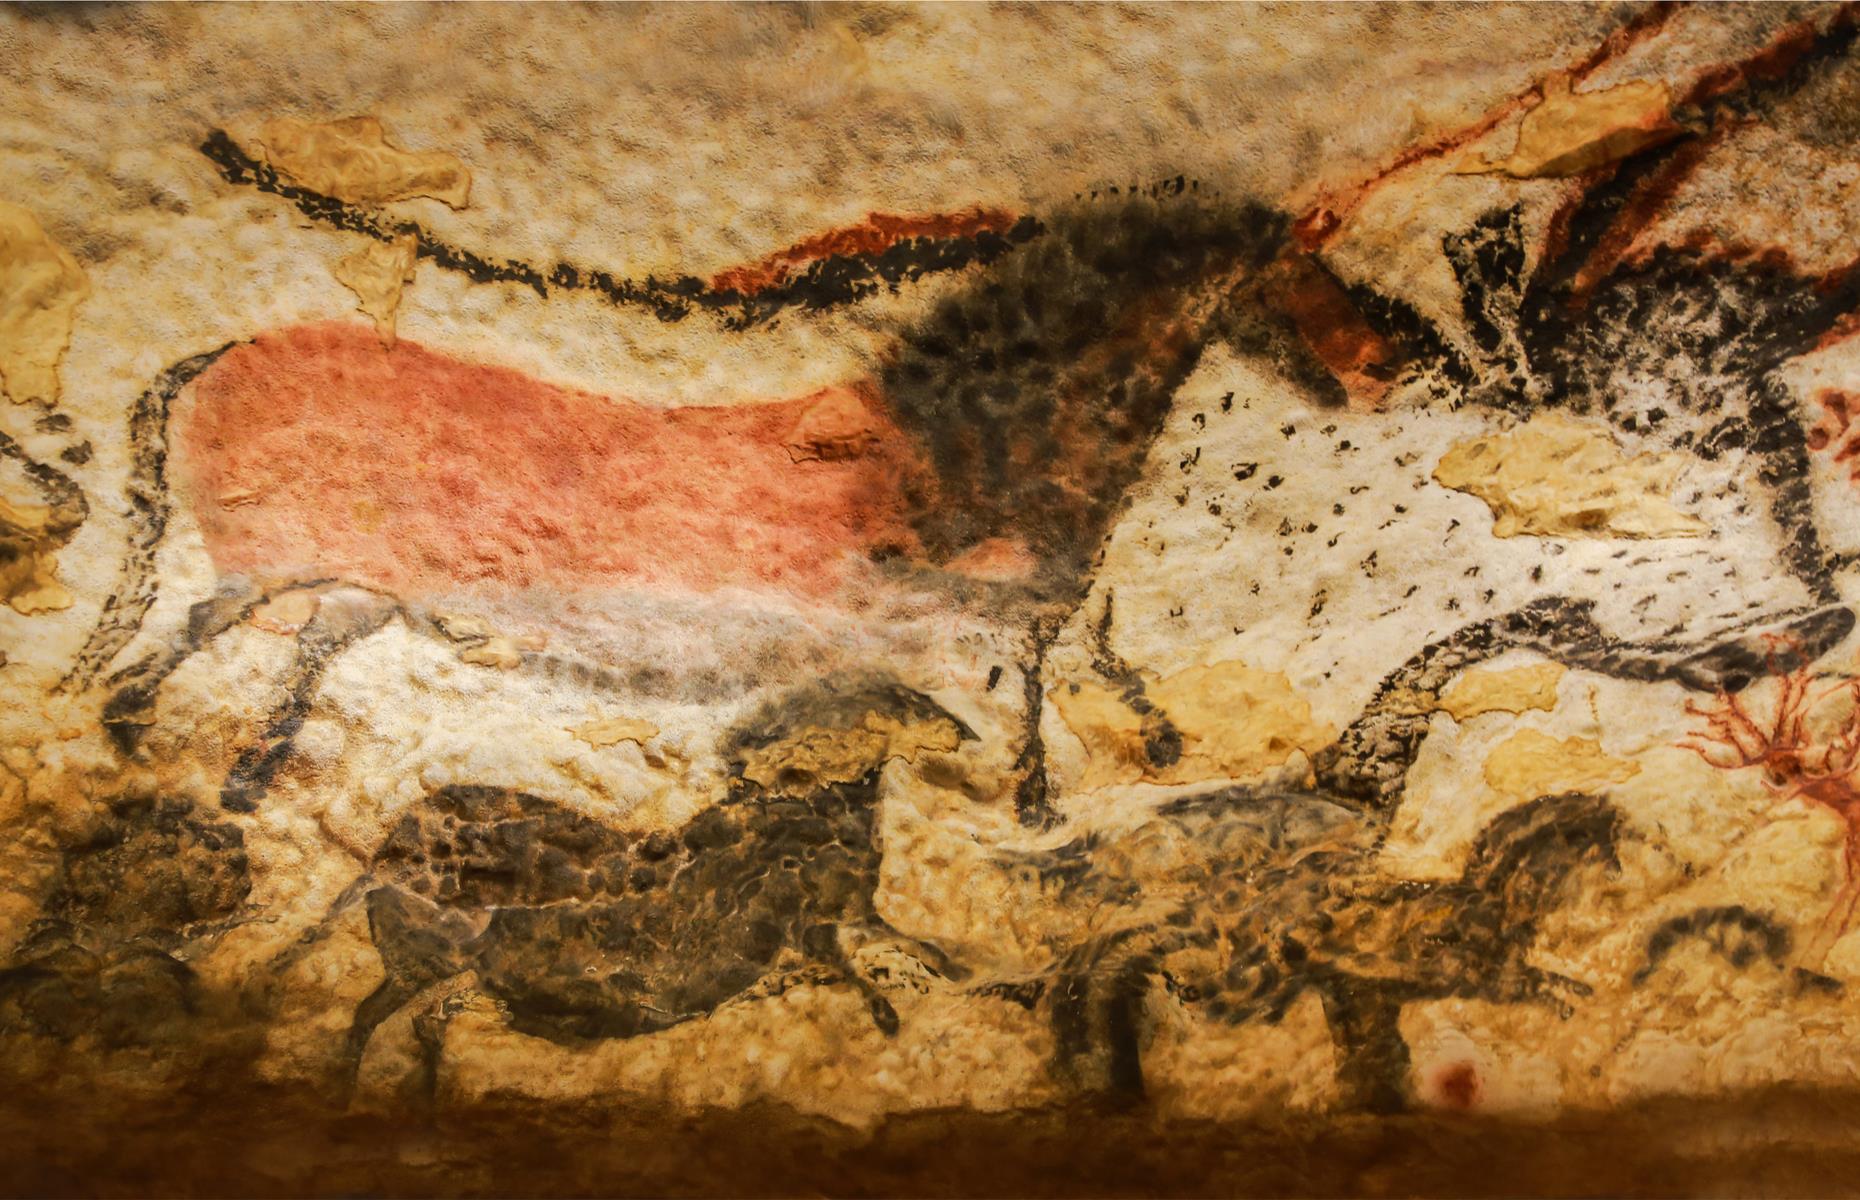 The mere breath of tourists within the prehistoric cave of Lascaux in the Dordogne caused such irrevocable damage that it was closed indefinitely. The incredible display of around 600 cave paintings were discovered by teenage boys in 1940 and opened to the public in 1948.